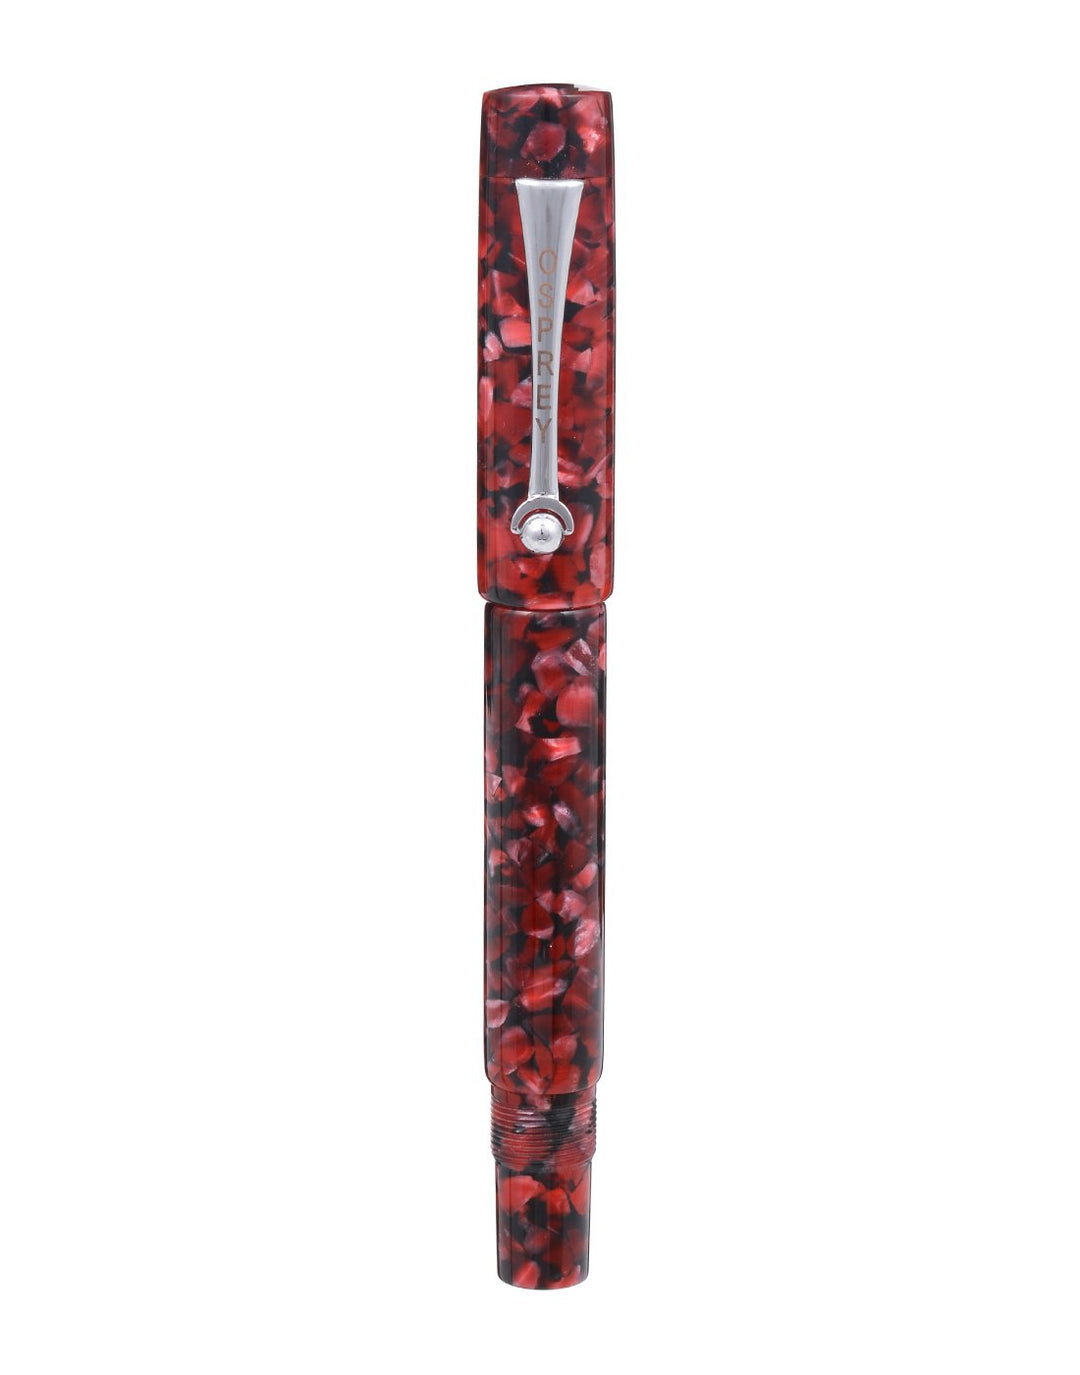 OSPREY PENS - MILANO Fountain Pen "Red Japser" With Standard And Flex Nib Options - Buchan's Kerrisdale Stationery